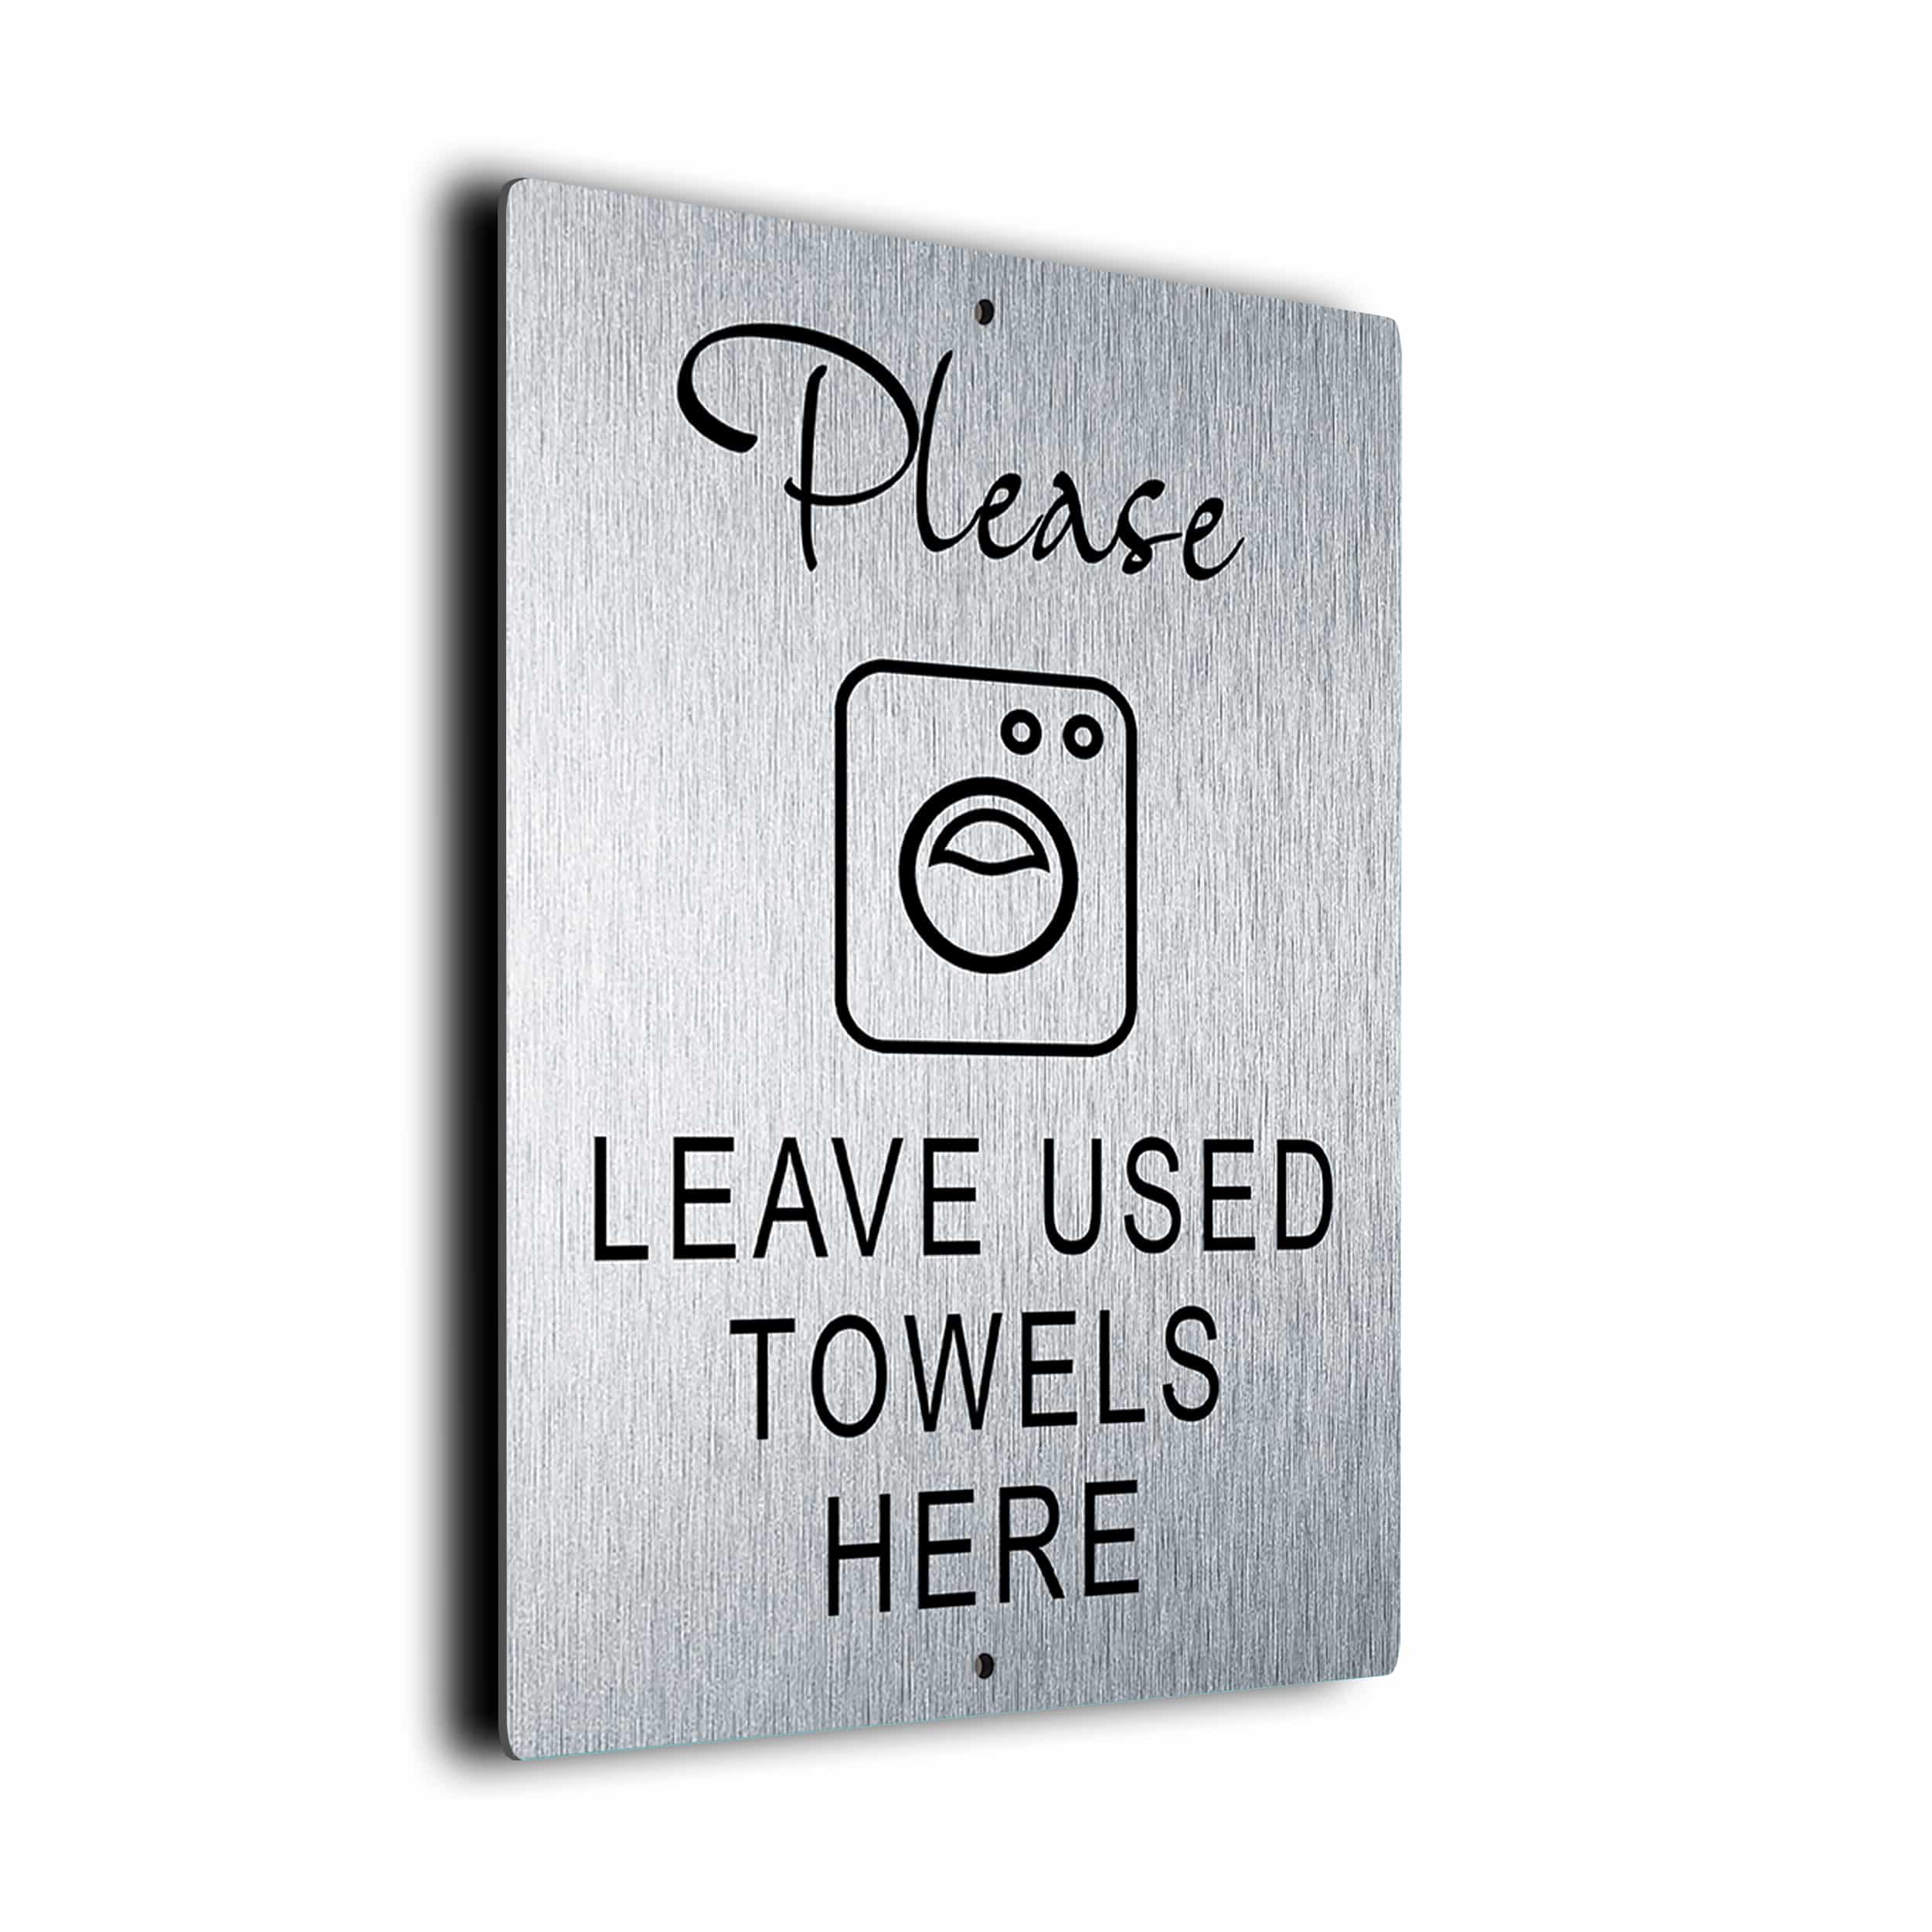 Used Towels Sign